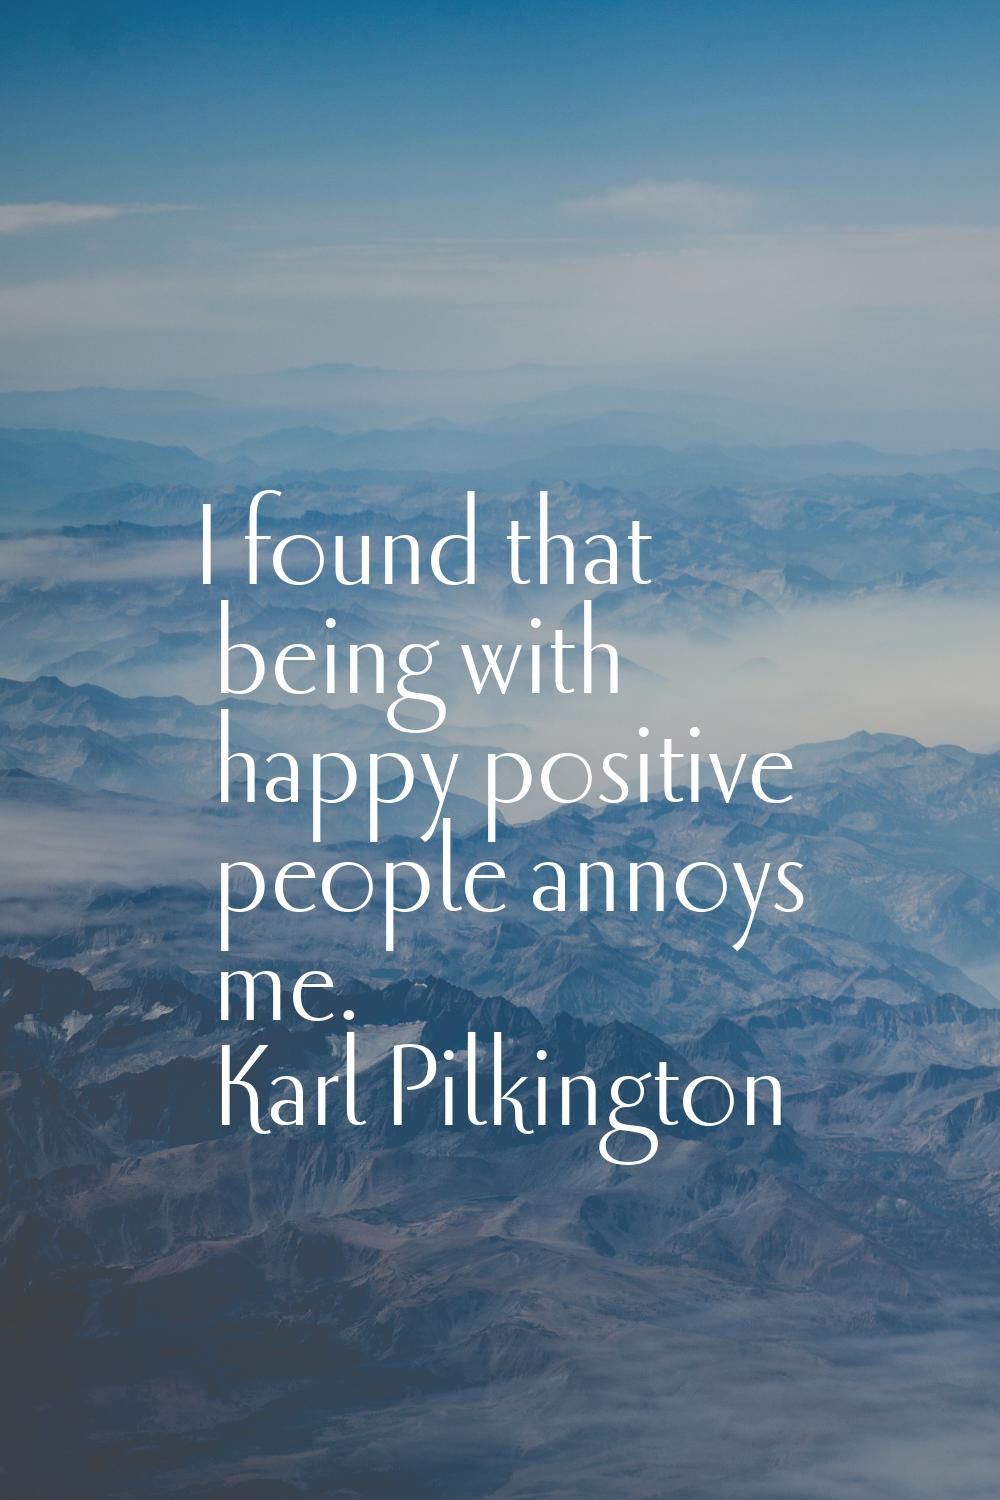 I found that being with happy positive people annoys me.